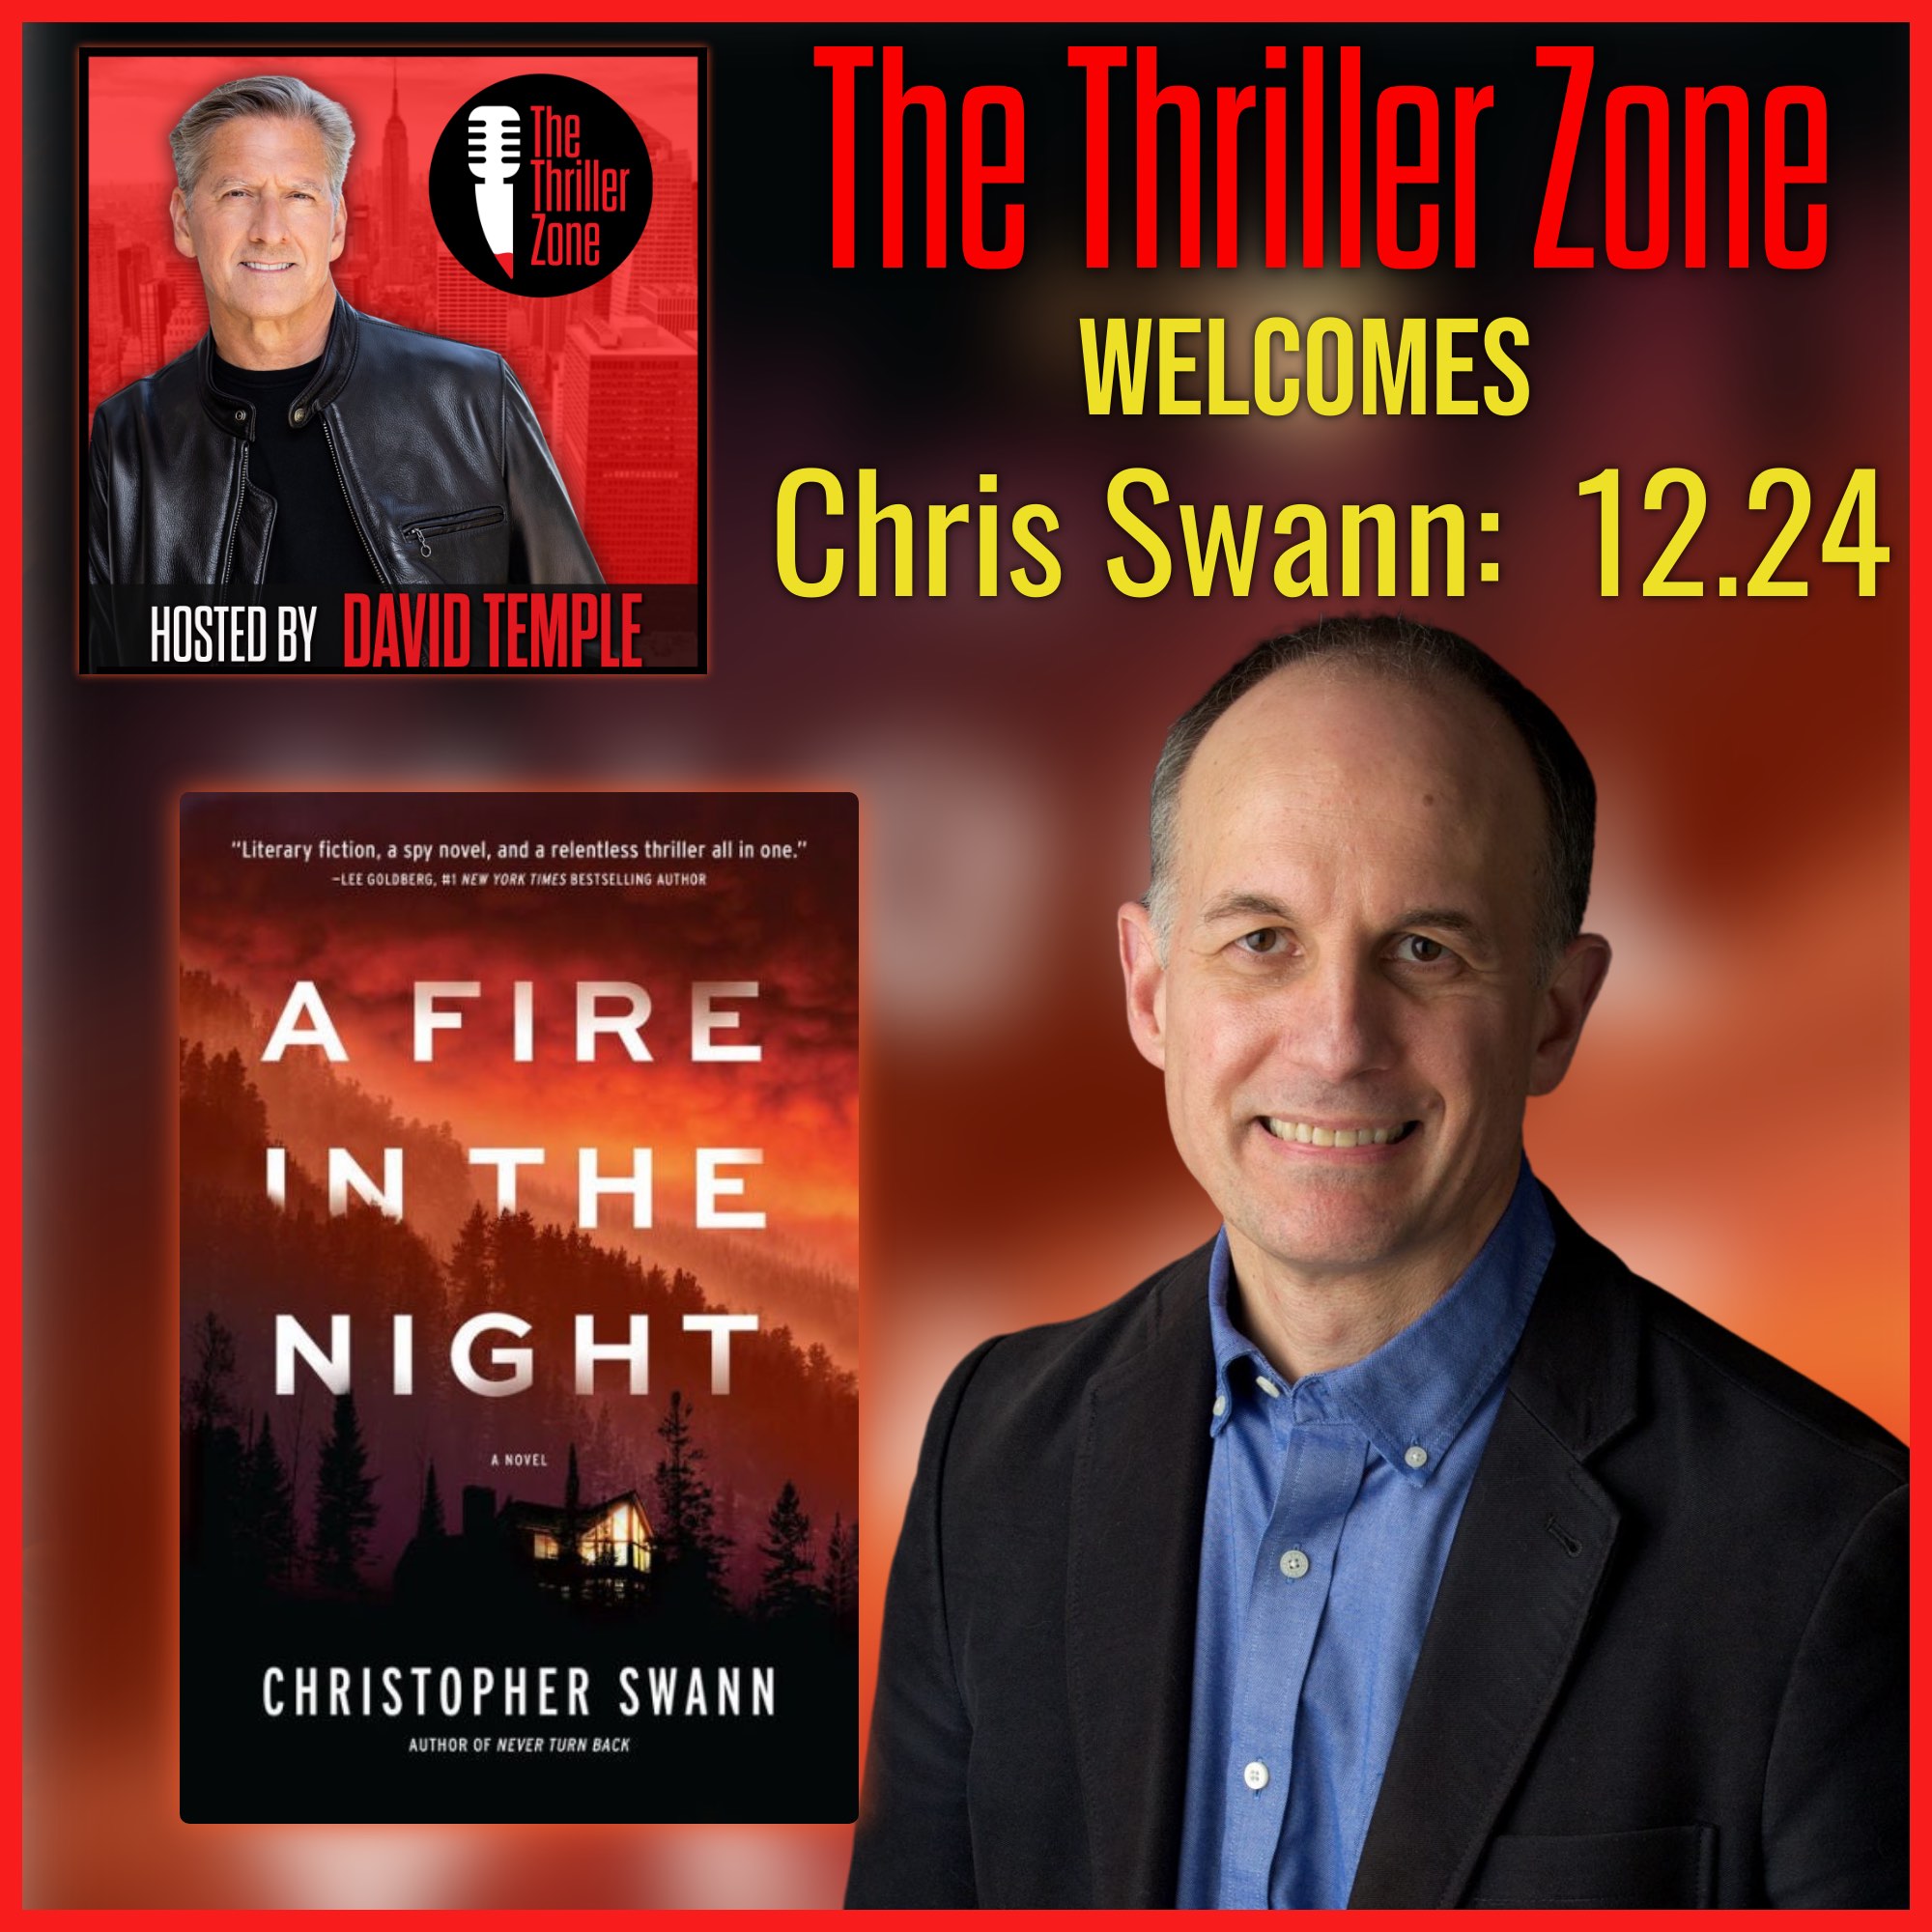 Chris Swann Author of A Fire In The Night Image